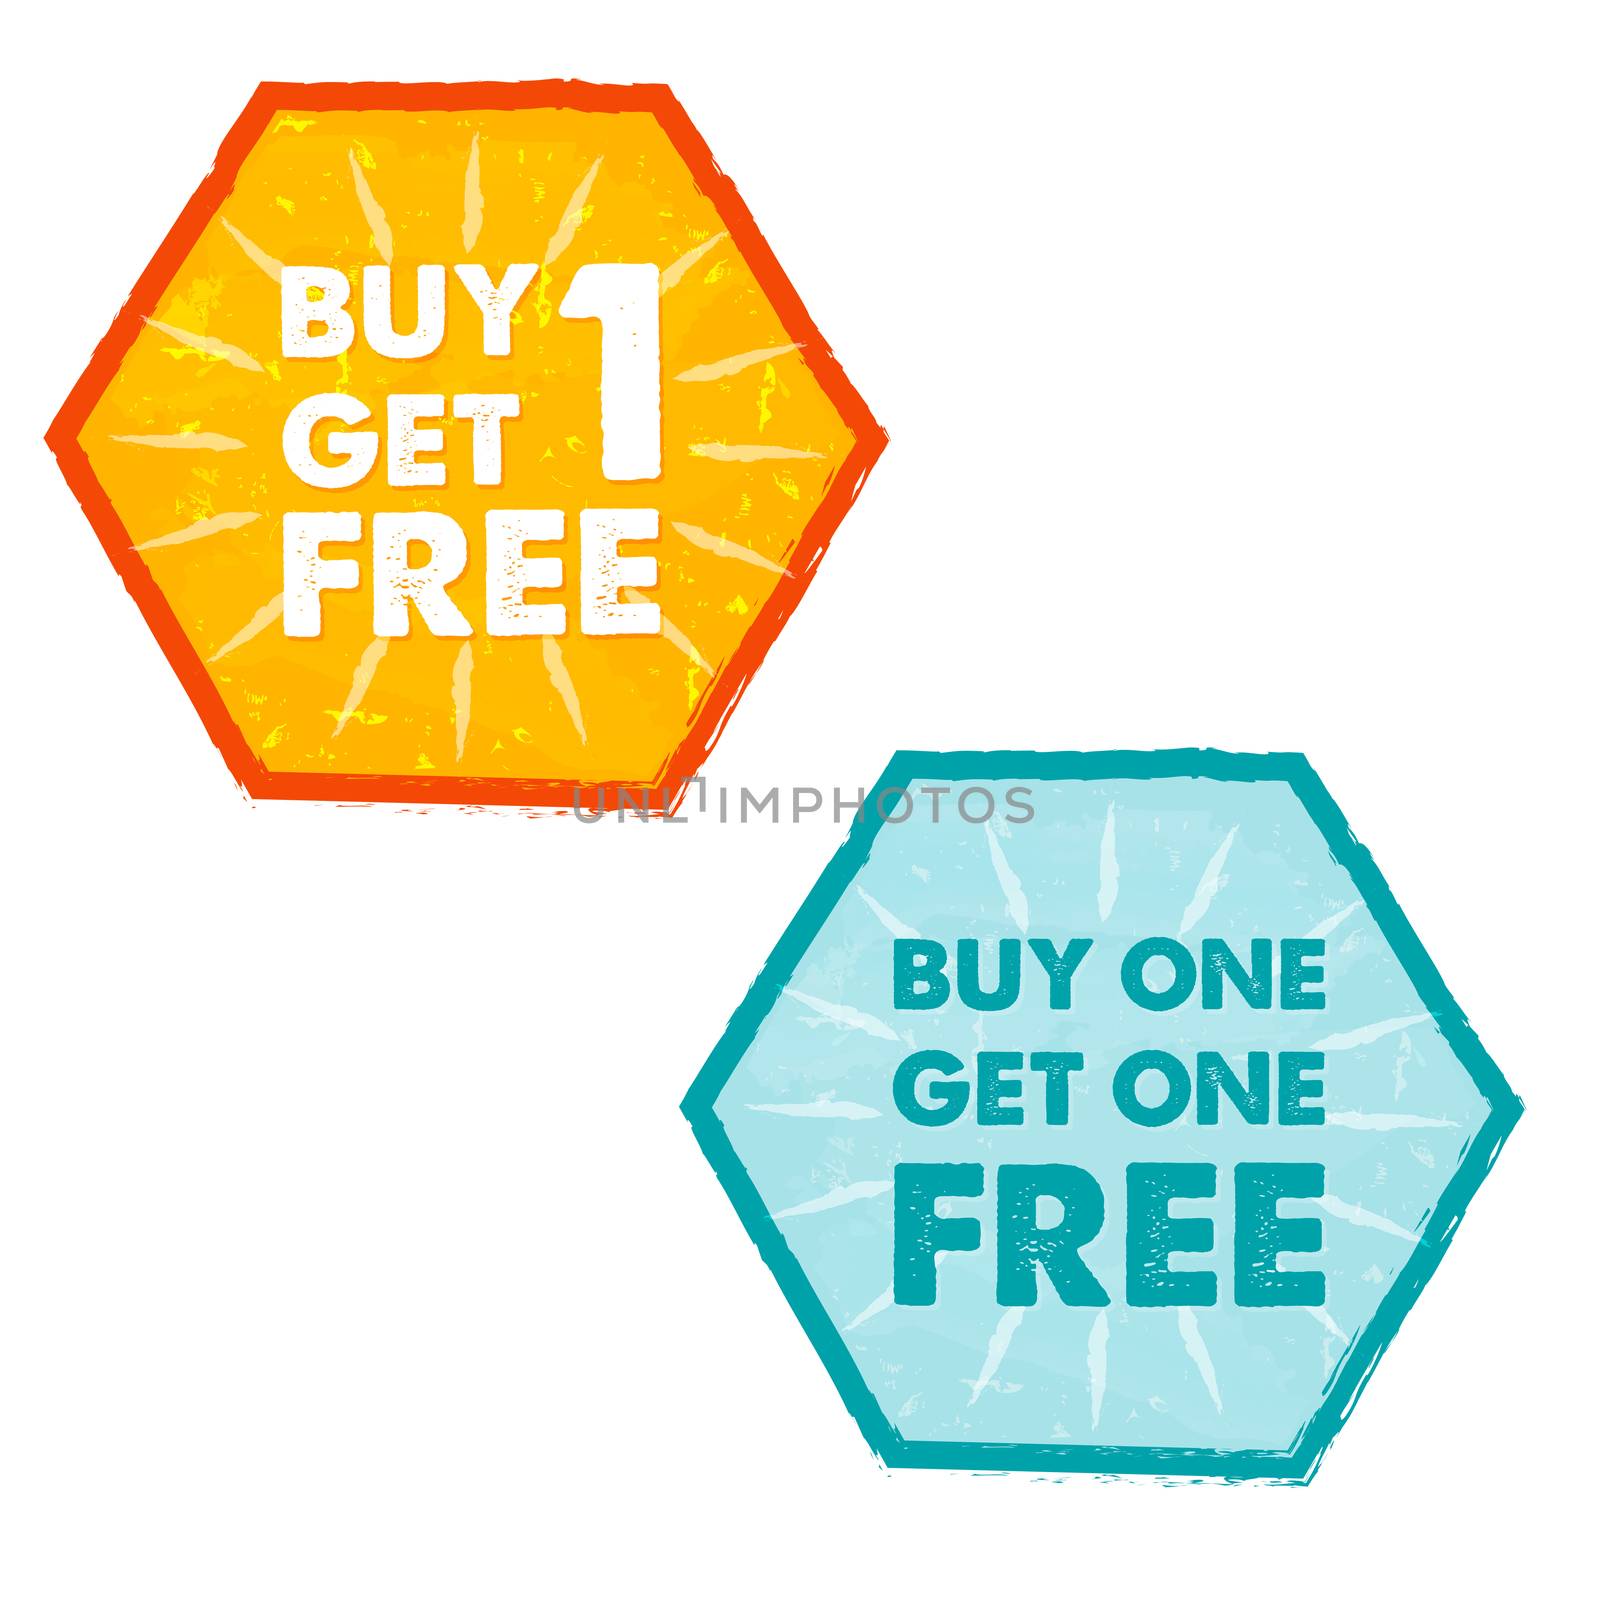 buy one get one free - text in orange and blue grunge flat design hexagons labels, business shopping concept